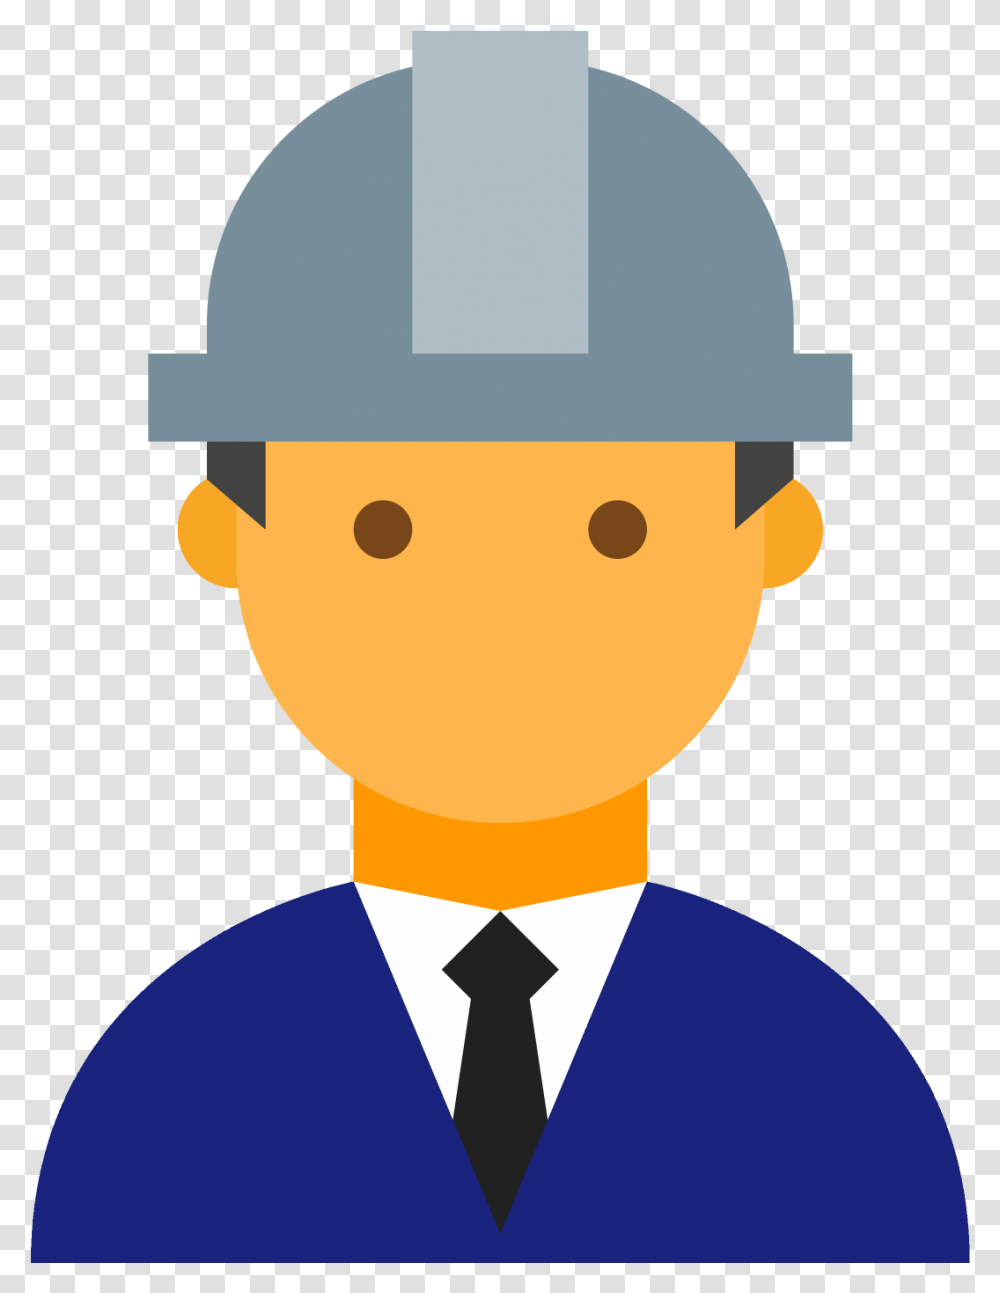 Mechanical Engineer Clipart Supply Chain Manager Icon, Apparel, Helmet, Hardhat Transparent Png